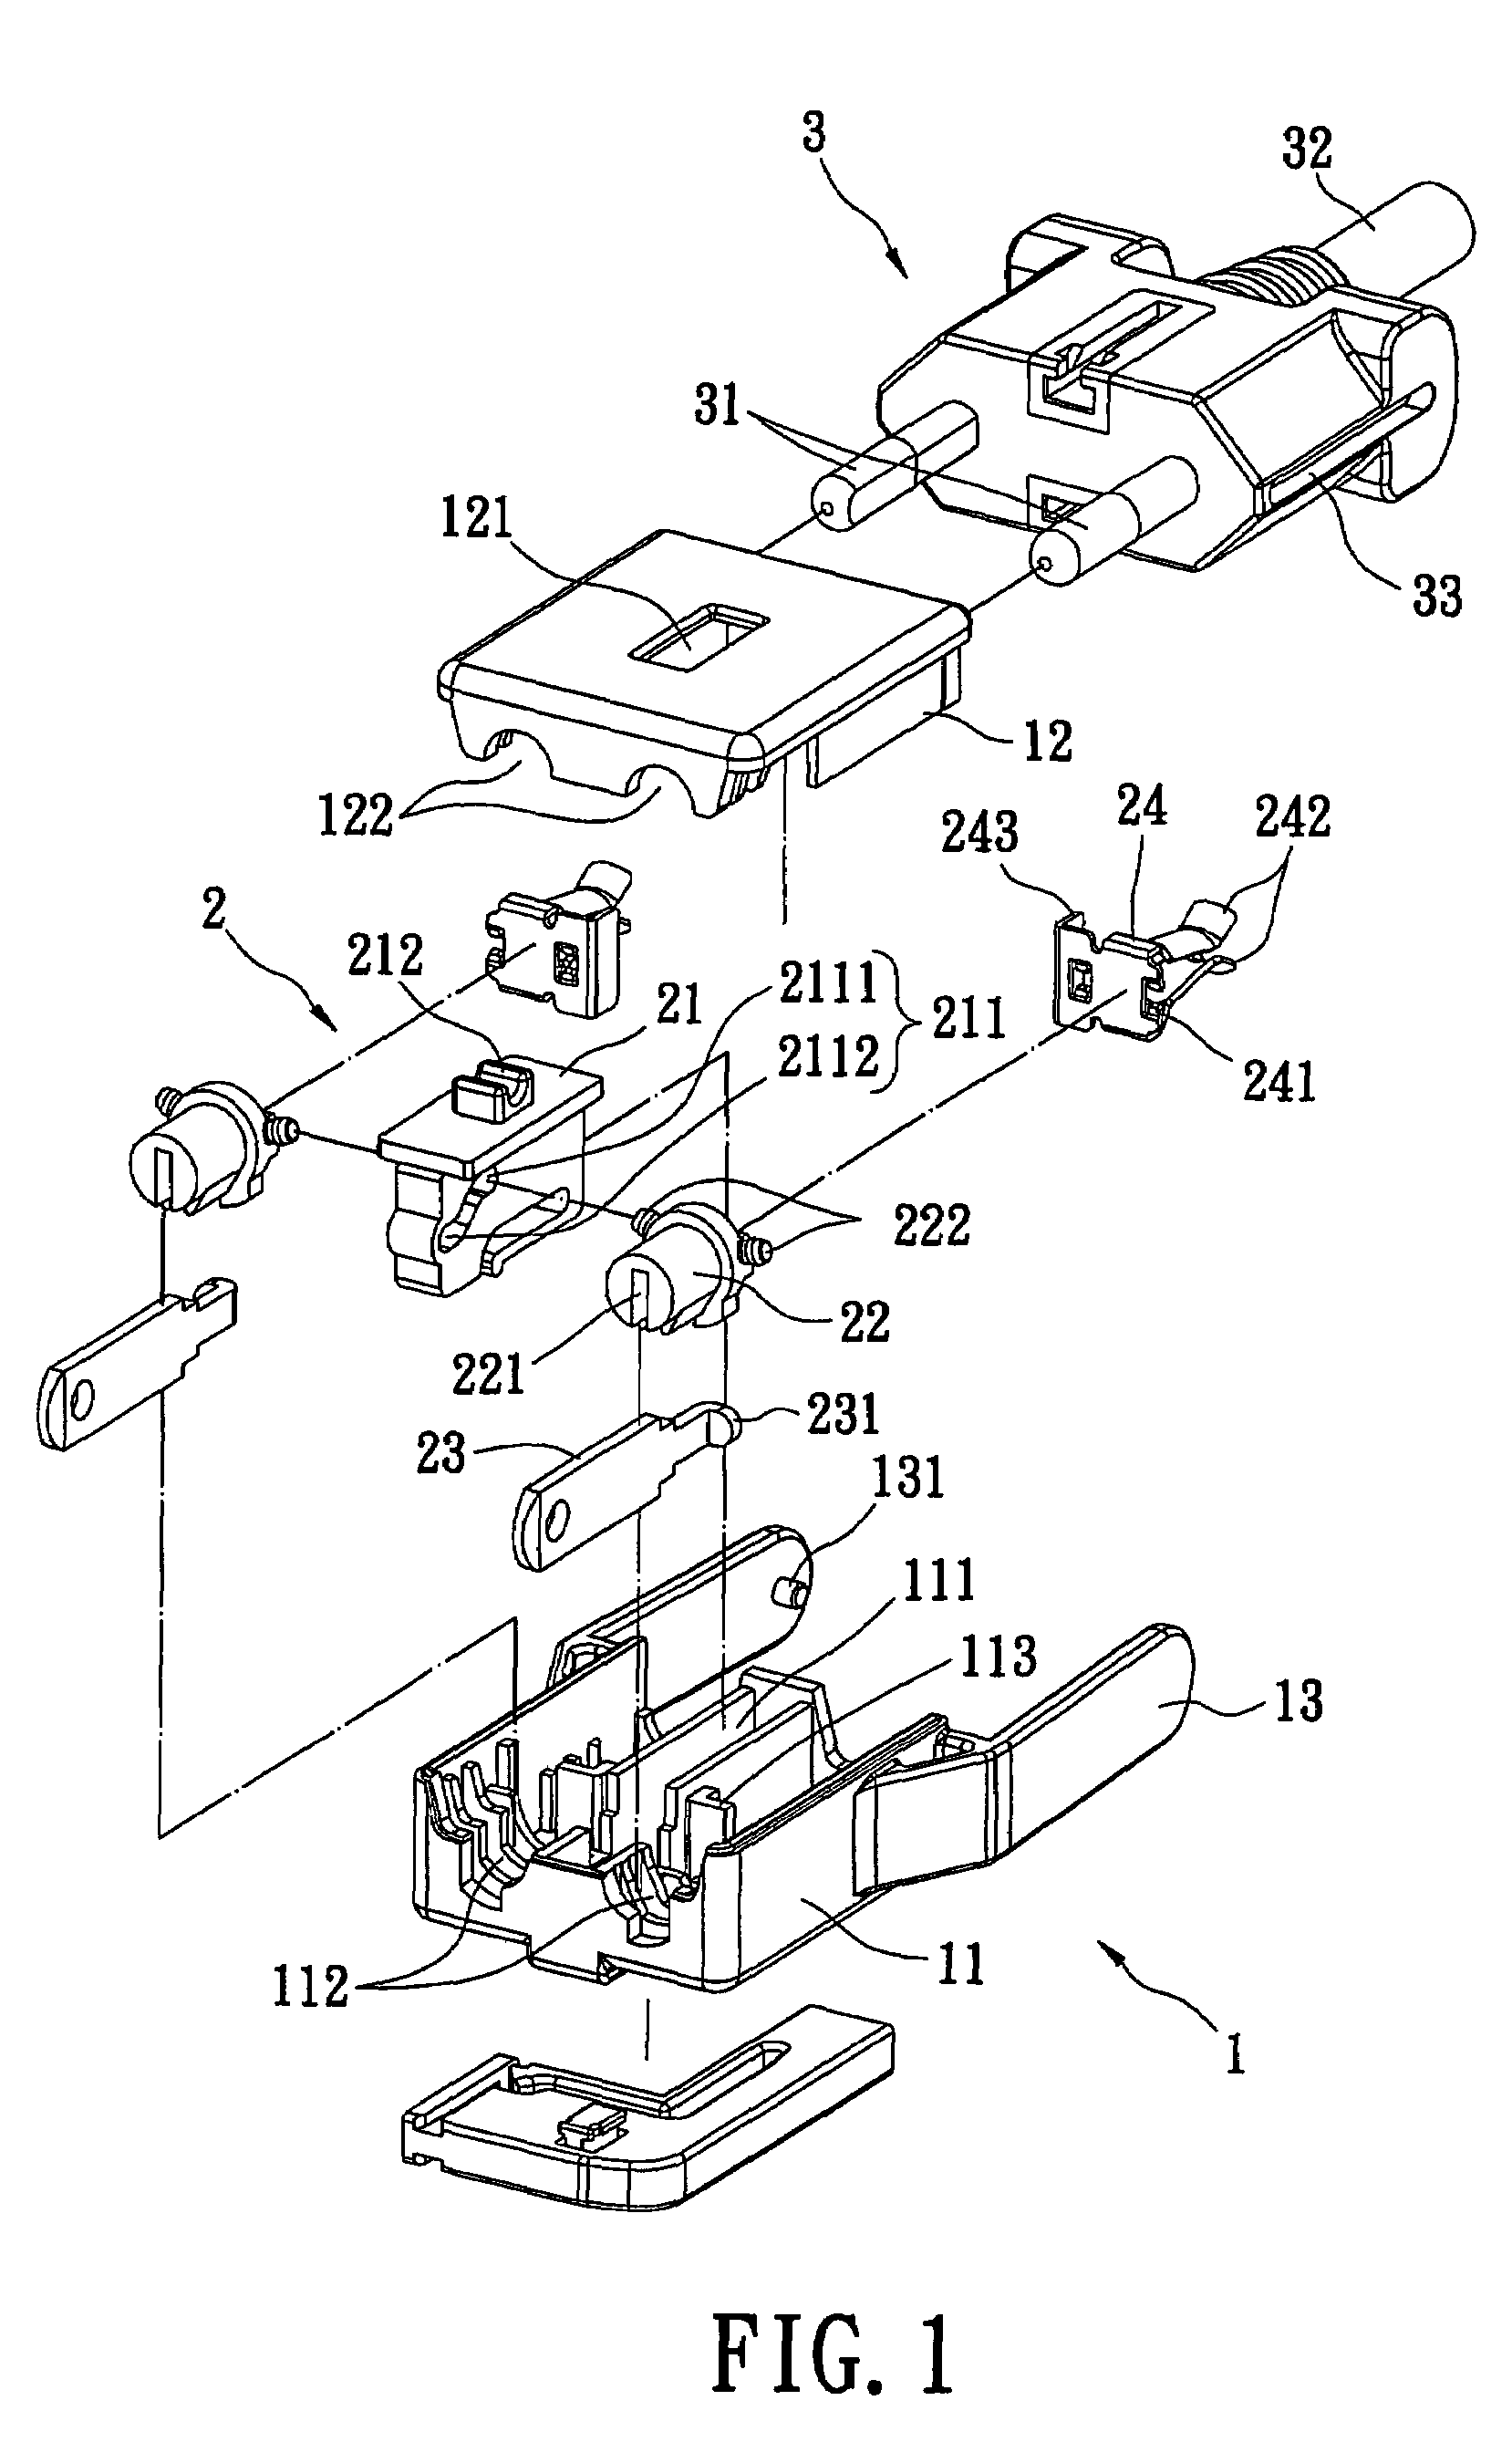 Compound conversion plug structure with adjustable angle and adapter